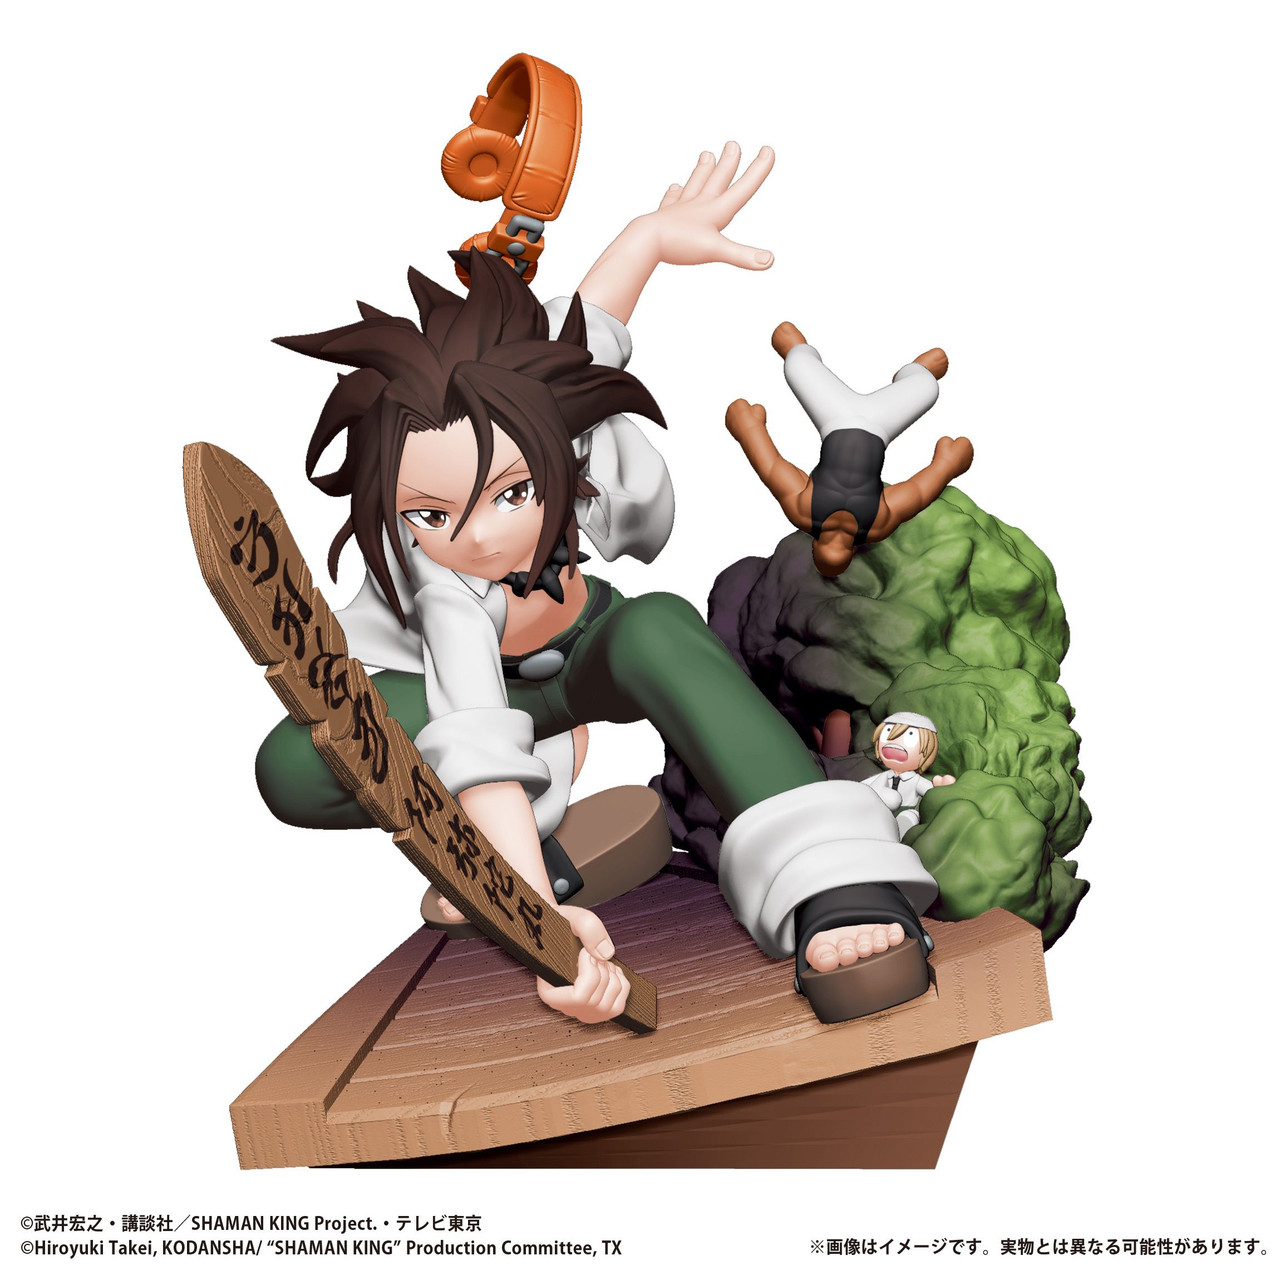 Final Weapon on X: Shaman King sequel anime is in production